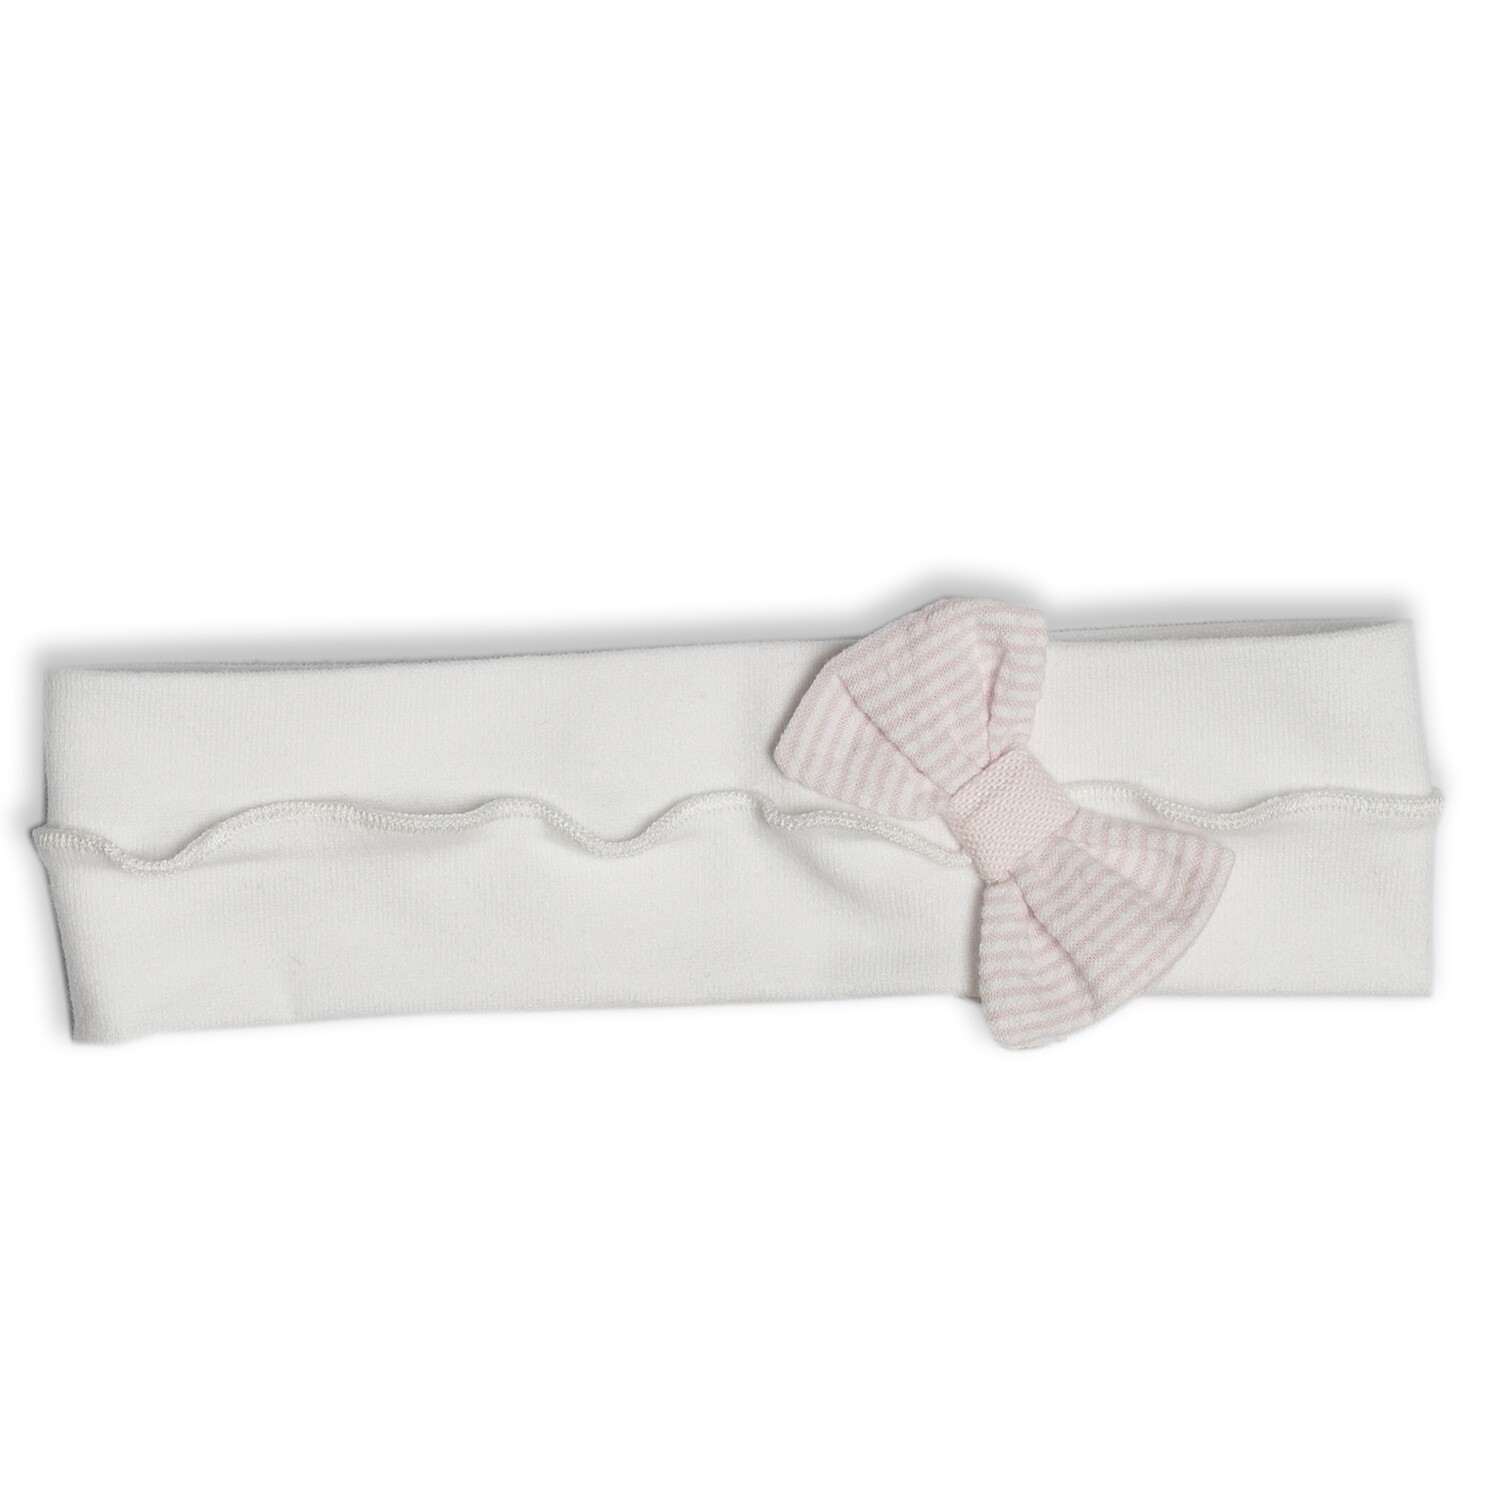 My First Collection hairband whi-pink striped bow